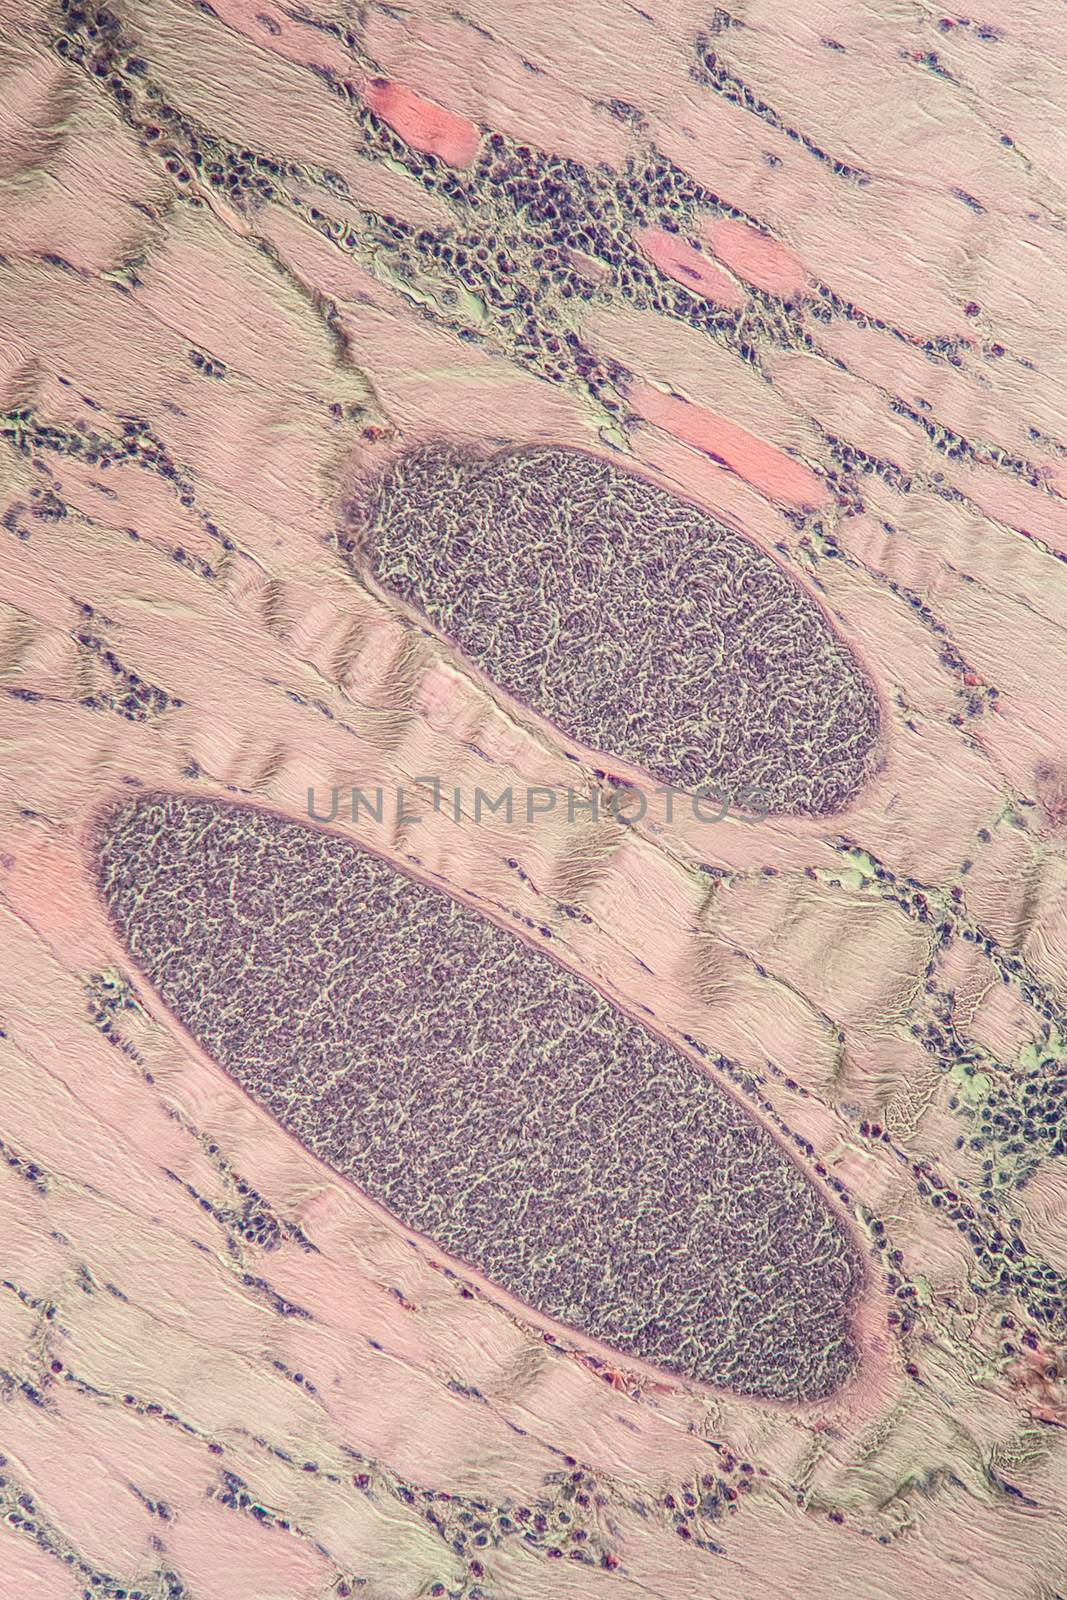 Sarcocystis spore animals in muscle, 200x by Dr-Lange